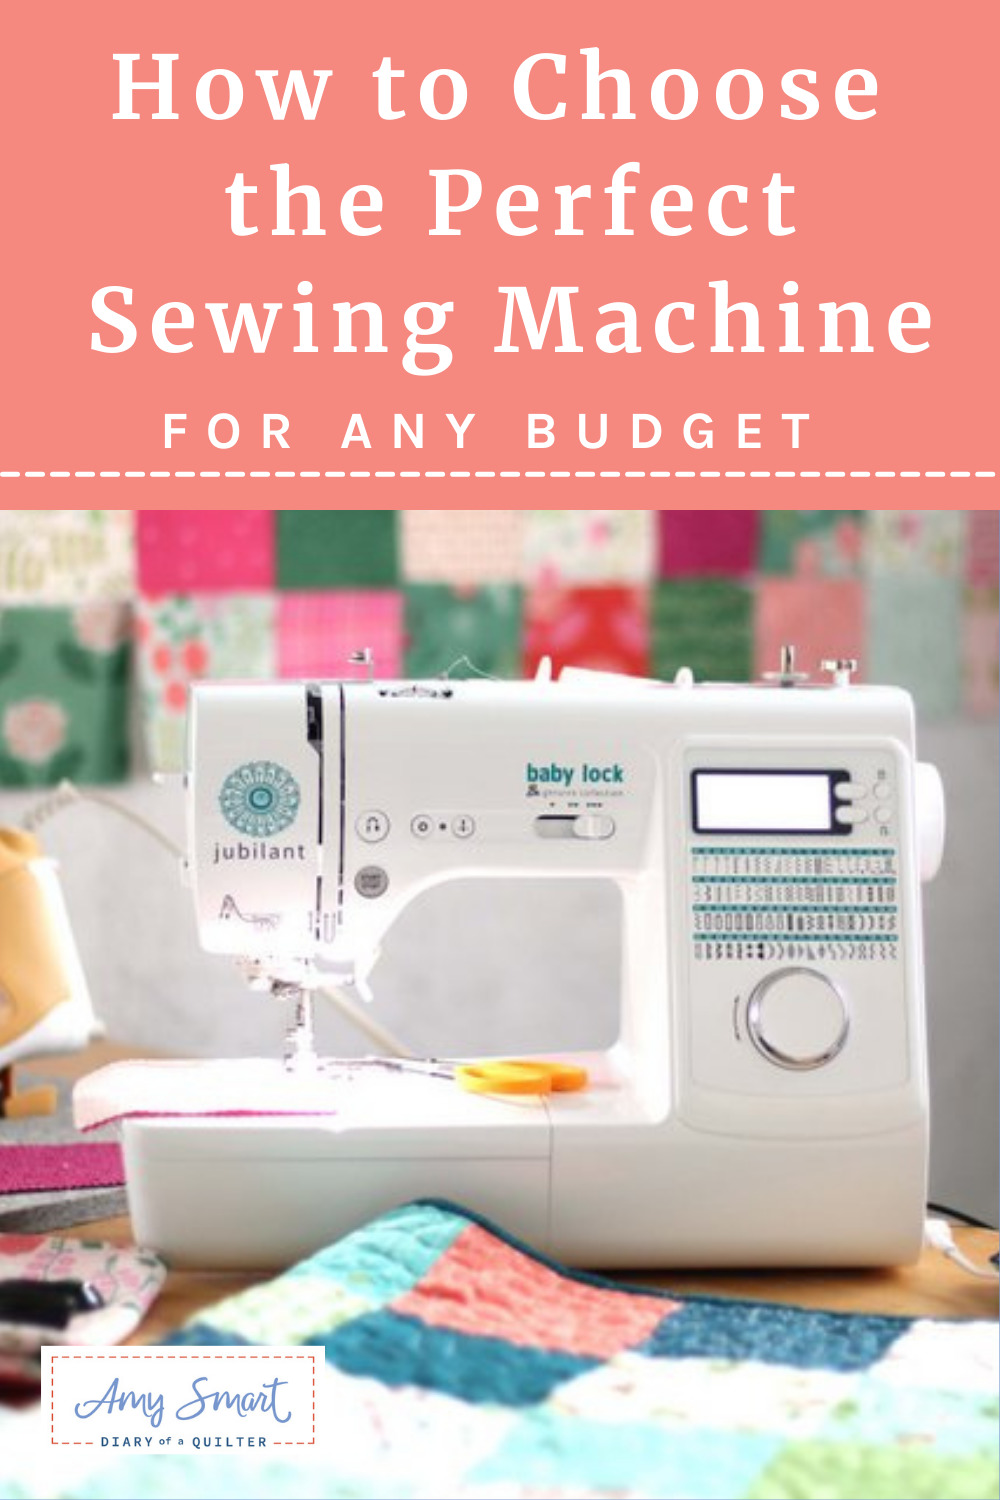 SINGER® M1500 Sewing Machine - Get Started - Selecting Stitches